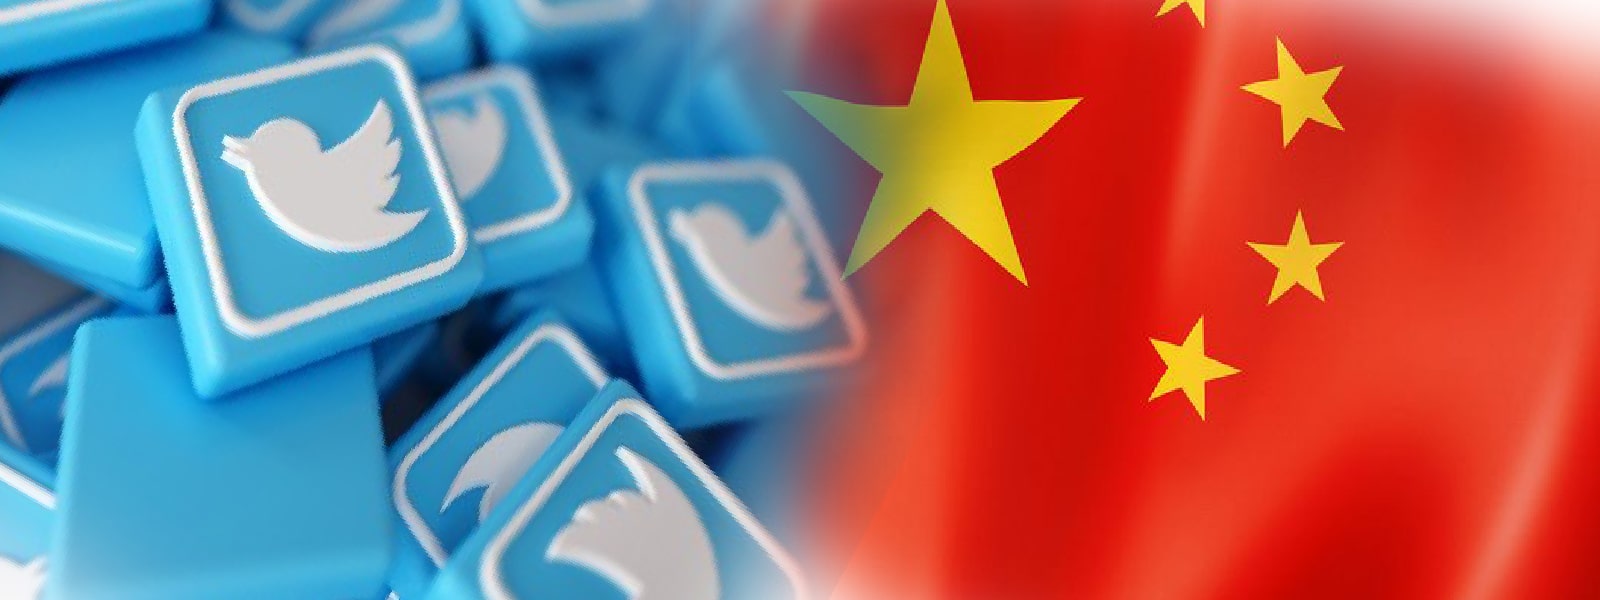 Twitter lifts ban on Chinese ambassador’s account amidst allegations of curbing freedom of speech